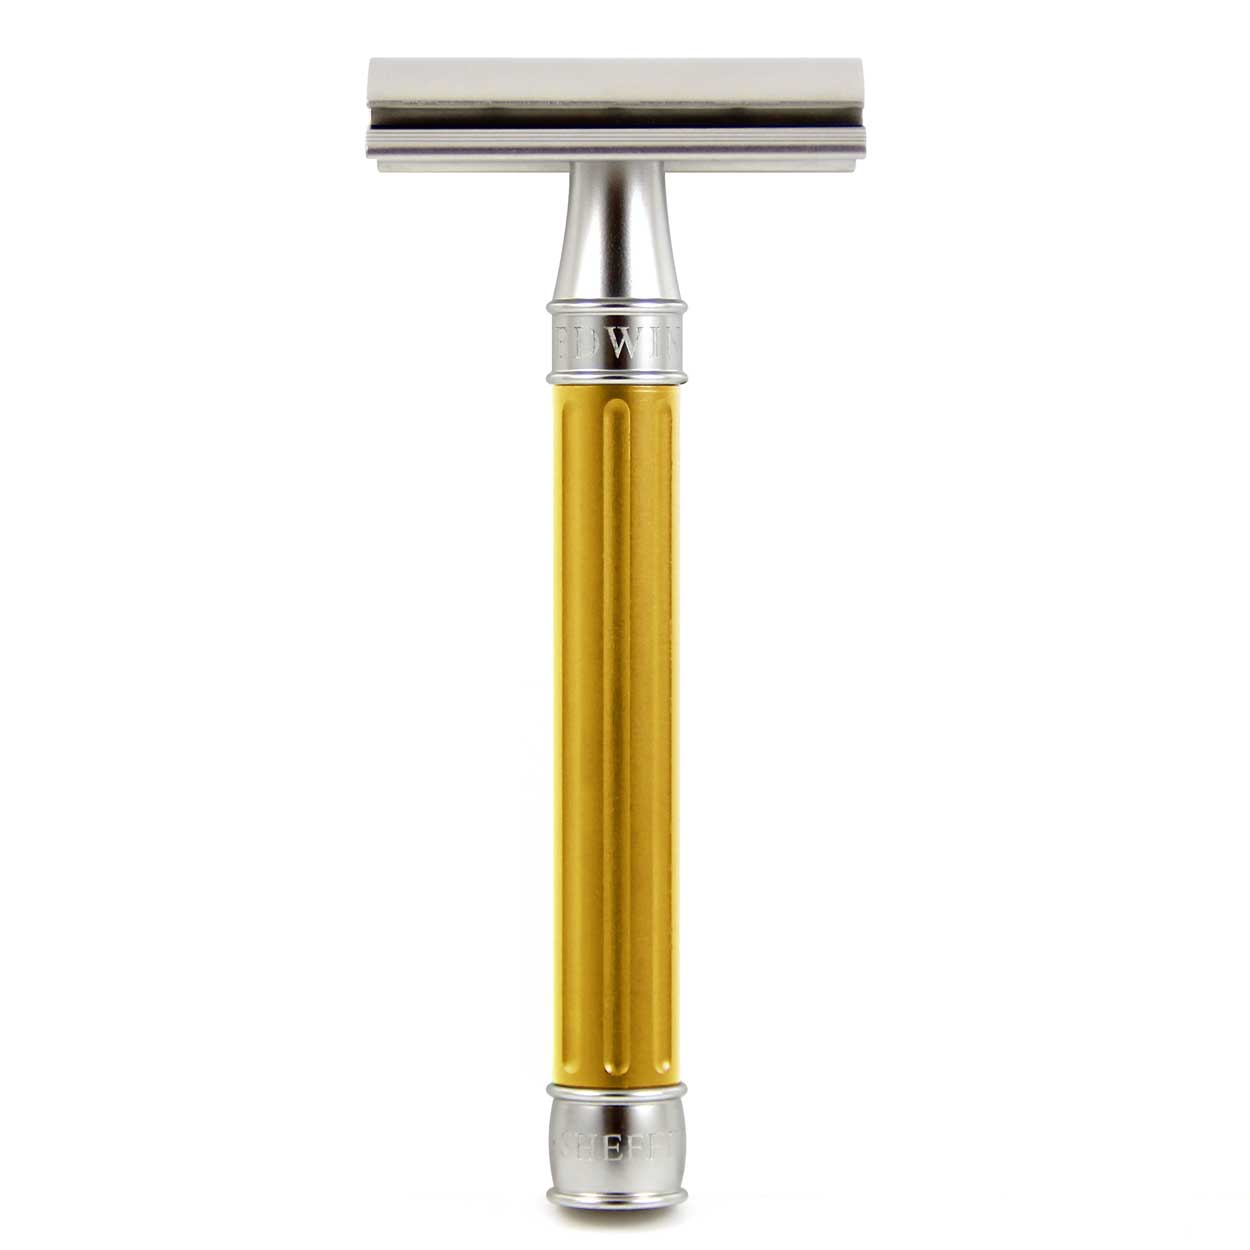 Edwin Jagger 3ONE6 DE Stainless Steel Safety Razor, Grooved, Anodised Yellow, 1x Pack of Feather Raz